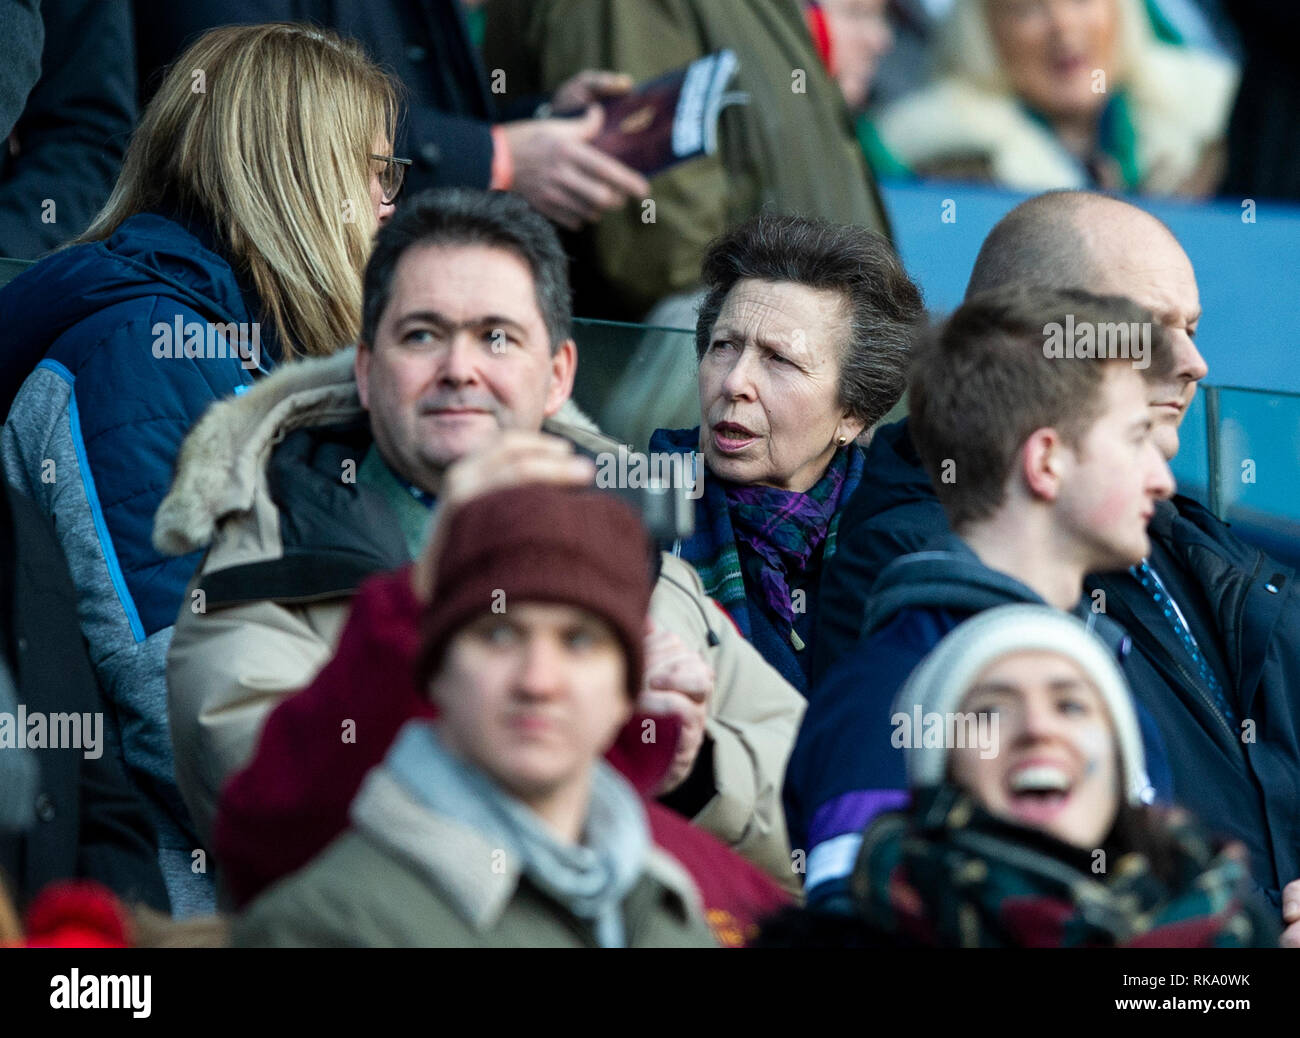 Edinburgh, Scotland, UK. 9th Feb 2019. Her Royal Highness, Princess Anne, takes her place in the crowd prior to kick off as Scotland play host to Ireland in their second game of the 2019 6 Nations Championship at Murrayfield Stadium   in Edinburgh.  (Photo by Ian Jacobs) Credit: Ian Jacobs/Alamy Live News Stock Photo